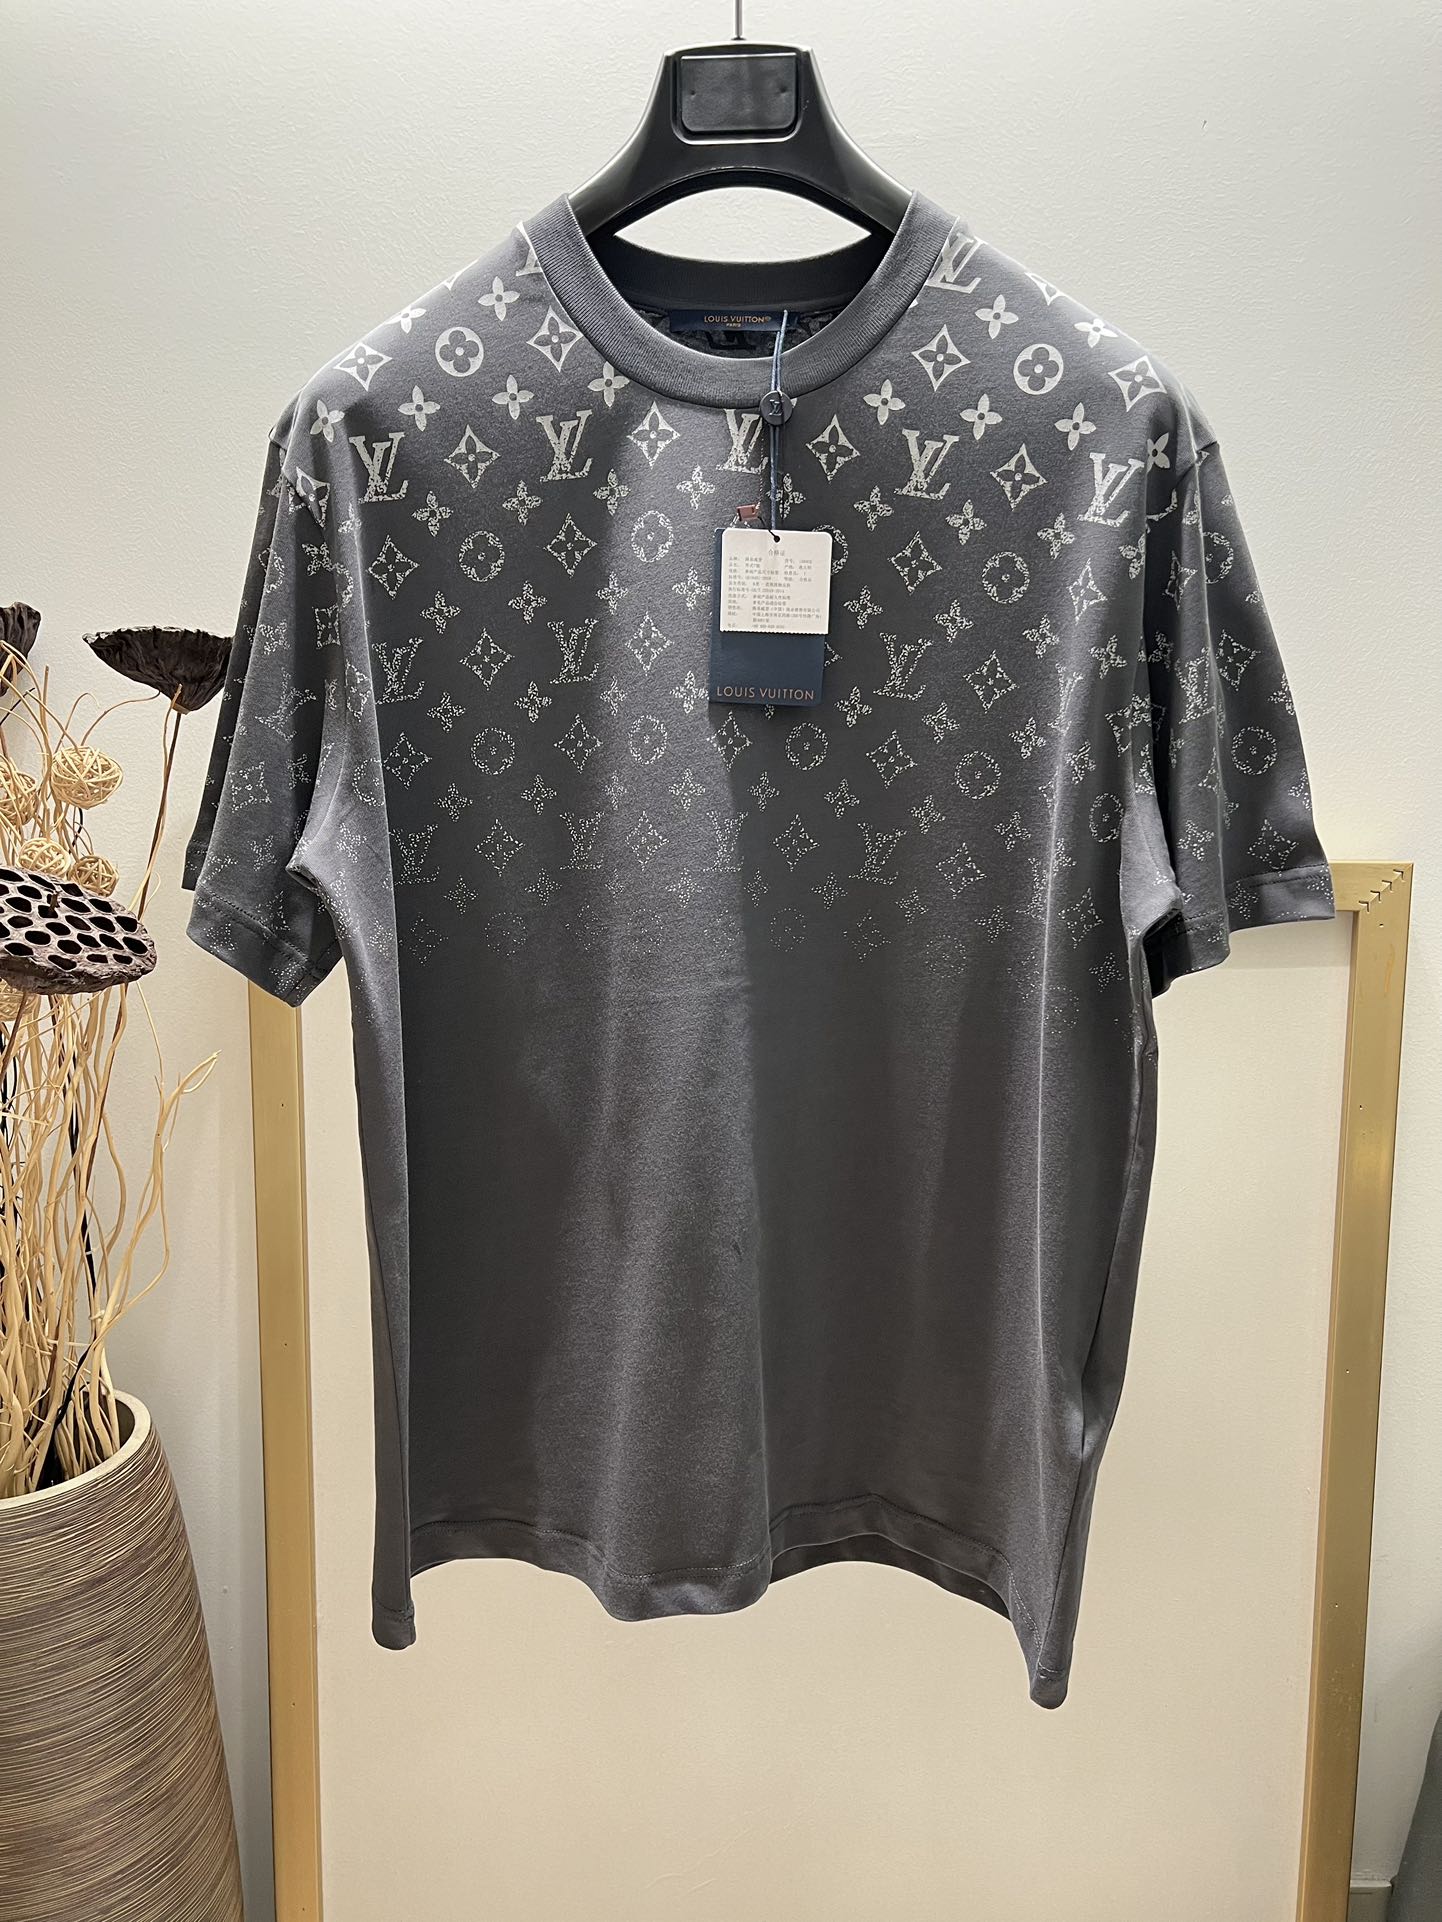 Louis Vuitton Fake
 Clothing T-Shirt Grey Unisex Cotton Knitting Fall/Winter Collection Casual